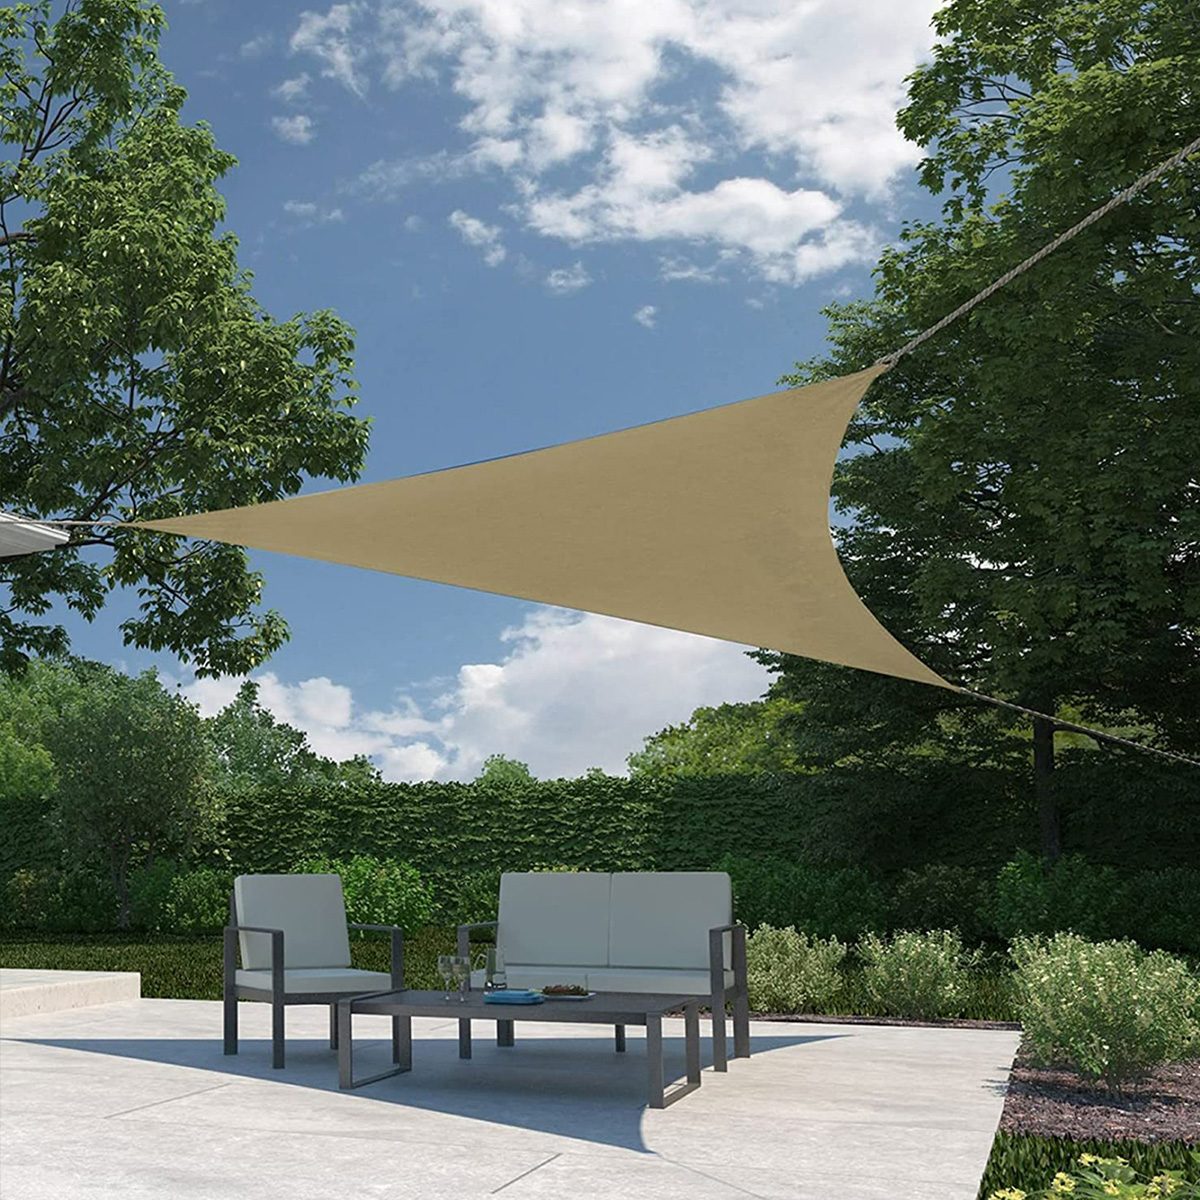 <h3 class="">Coolaroo Triangle Ready-to-Hang Shade Sail</h3> <p>If you're looking to hang a temporary shade sail for a <a href="https://www.familyhandyman.com/list/12-tips-for-planning-the-ultimate-backyard-barbecue/">backyard barbecue</a>, we love this <a href="https://www.amazon.com/dp/B074XD2VCQ" rel="noopener">triangle shade sail</a>. Available in five sizes and 10 color options, it protects against 90% of UV rays. With the included ropes, you can hang it up easily from a wall, post or even a tree—no tools required! Then, simply untie and fold it up when you're done.</p> <p><strong>Pros</strong></p> <ul> <li class="">Includes ropes for quick hanging</li> <li>Wallet-friendly price</li> <li class="">Blocks up to 90% of UV rays</li> </ul> <p><strong>Cons</strong></p> <ul> <li>Material may not be as durable as other options</li> </ul> <p class="listicle-page__cta-button-shop"><a class="shop-btn" href="https://www.amazon.com/dp/B074XD2VCQ">Shop Now</a></p>